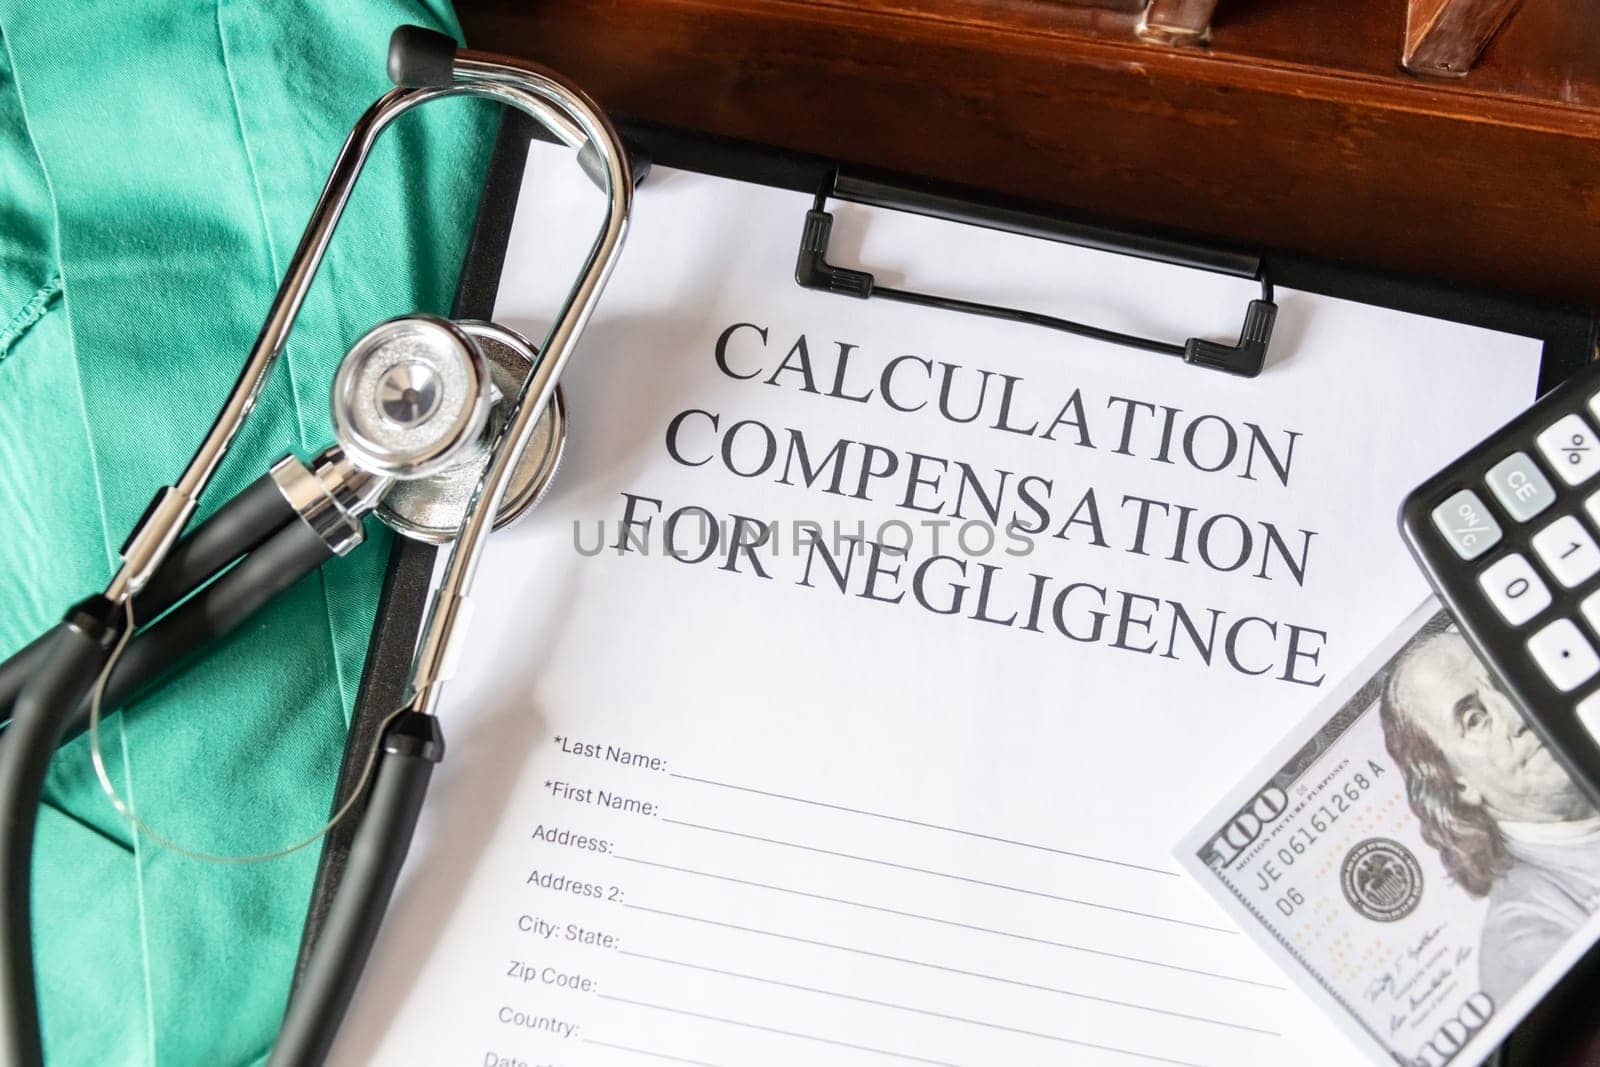 Document for calculating negligence compensation, with a stethoscope, money, and calculator on a medical uniform background. by jbruiz78